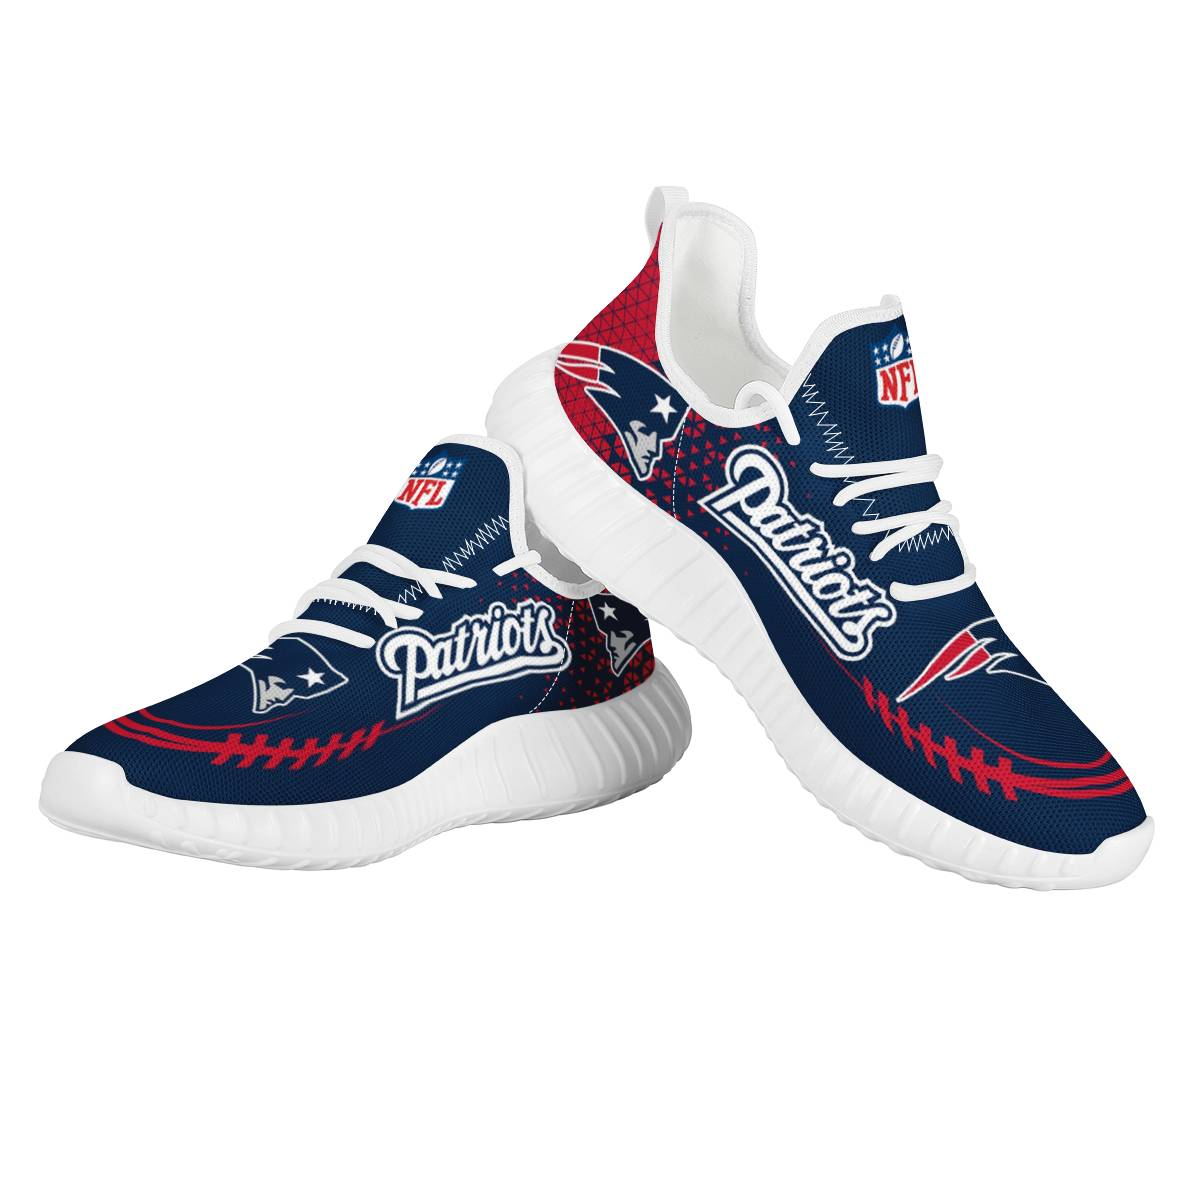 Women's New England Patriots Mesh Knit Sneakers/Shoes 013